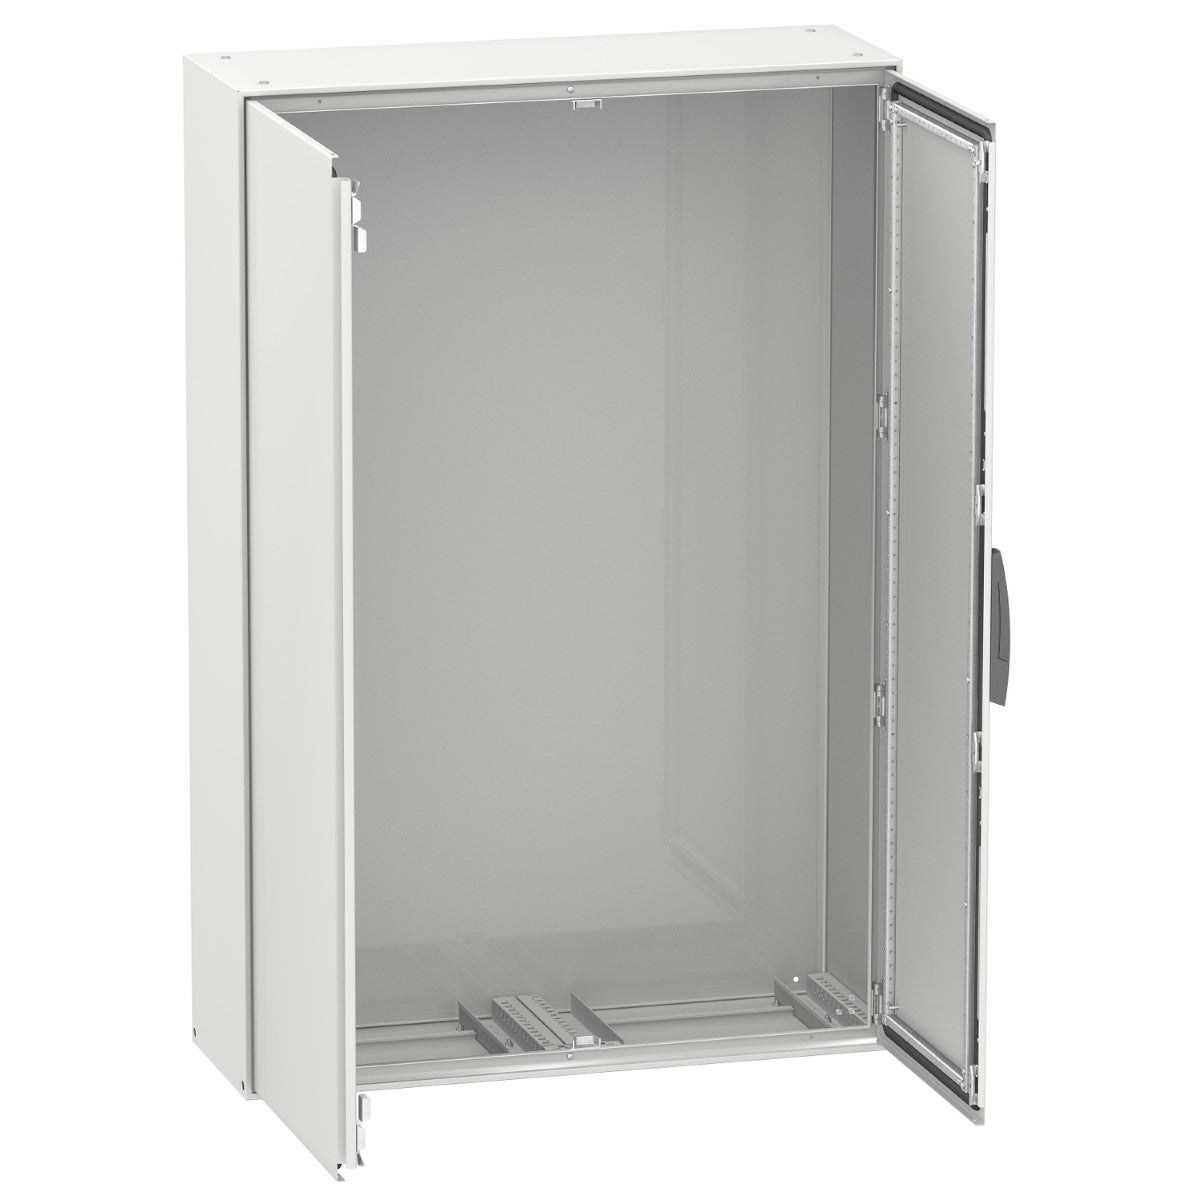 Spacial SM compact enclosure with mounting plate - 1800x1600x500 mm